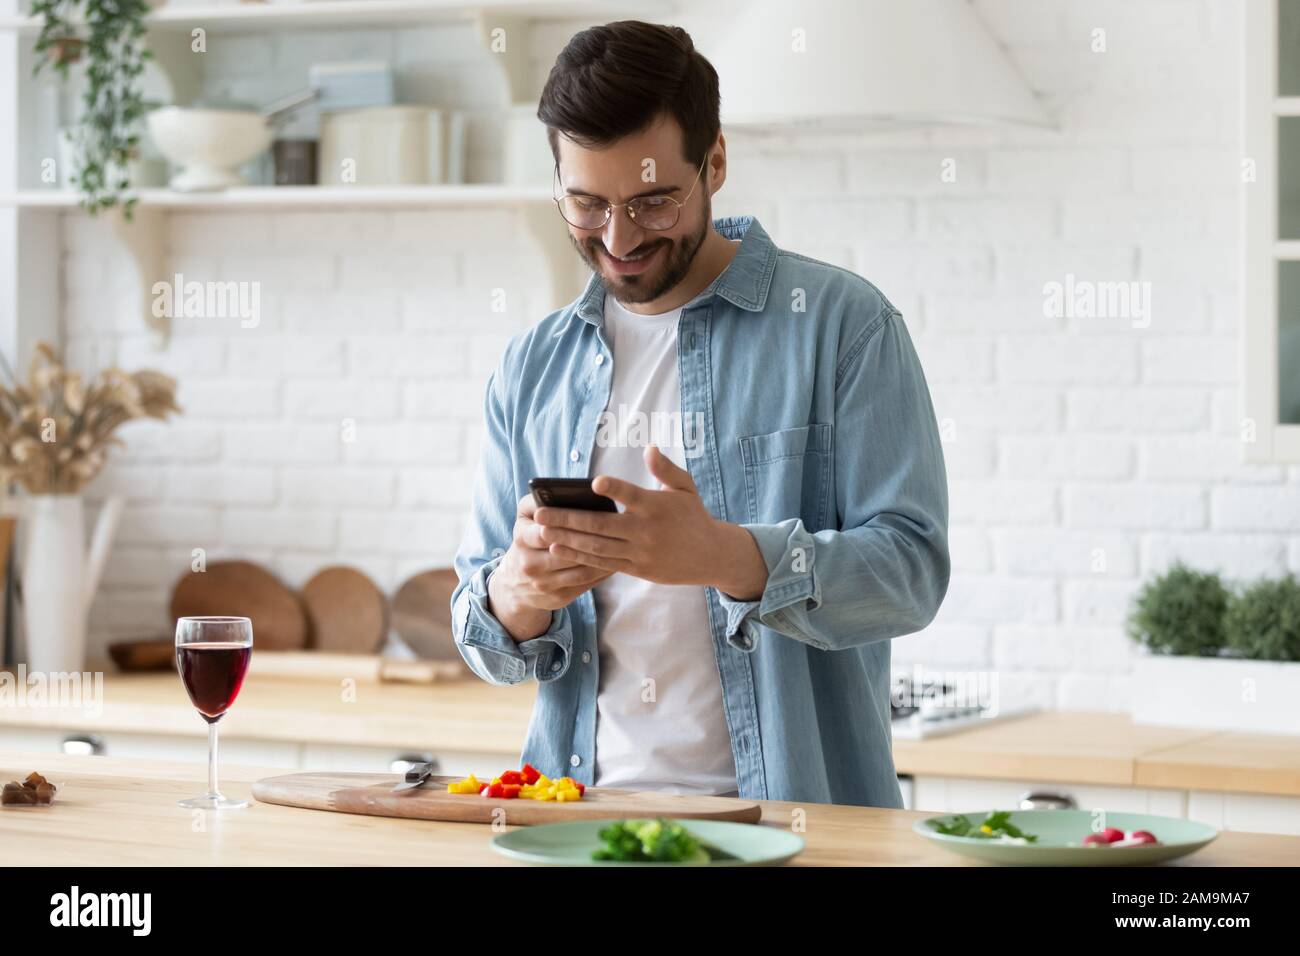 Happy millennial guy in eyeglasses web surfing recipe for meal. Stock Photo